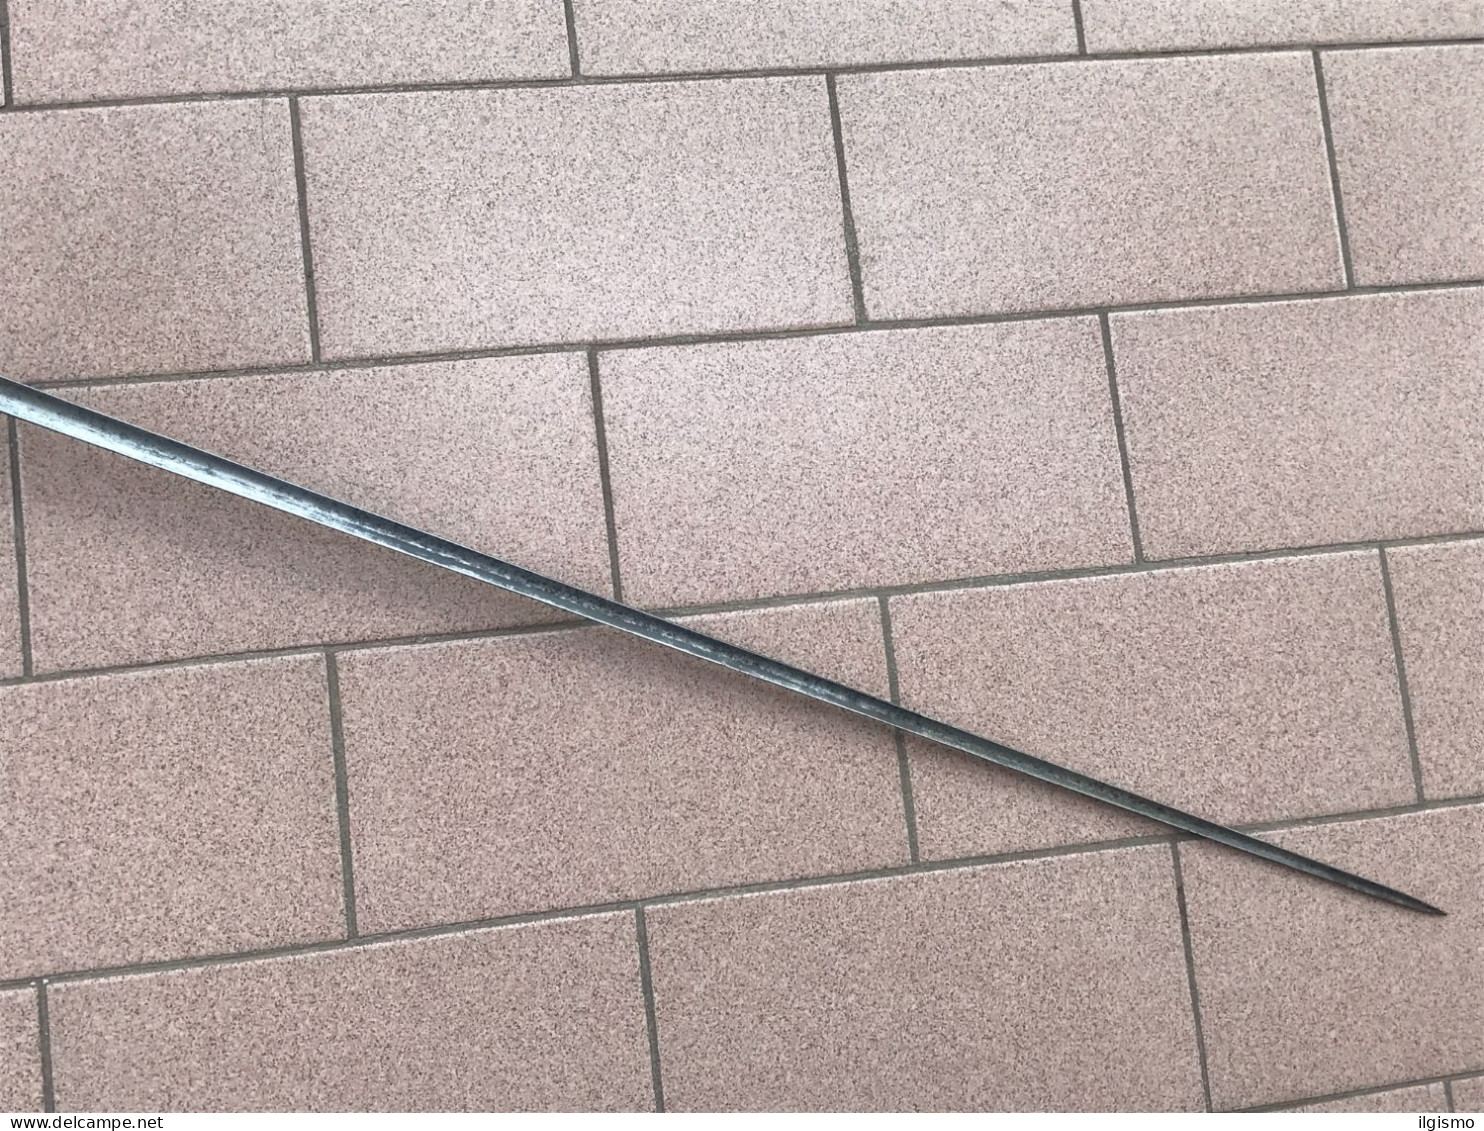 epee sabre (1076 A)